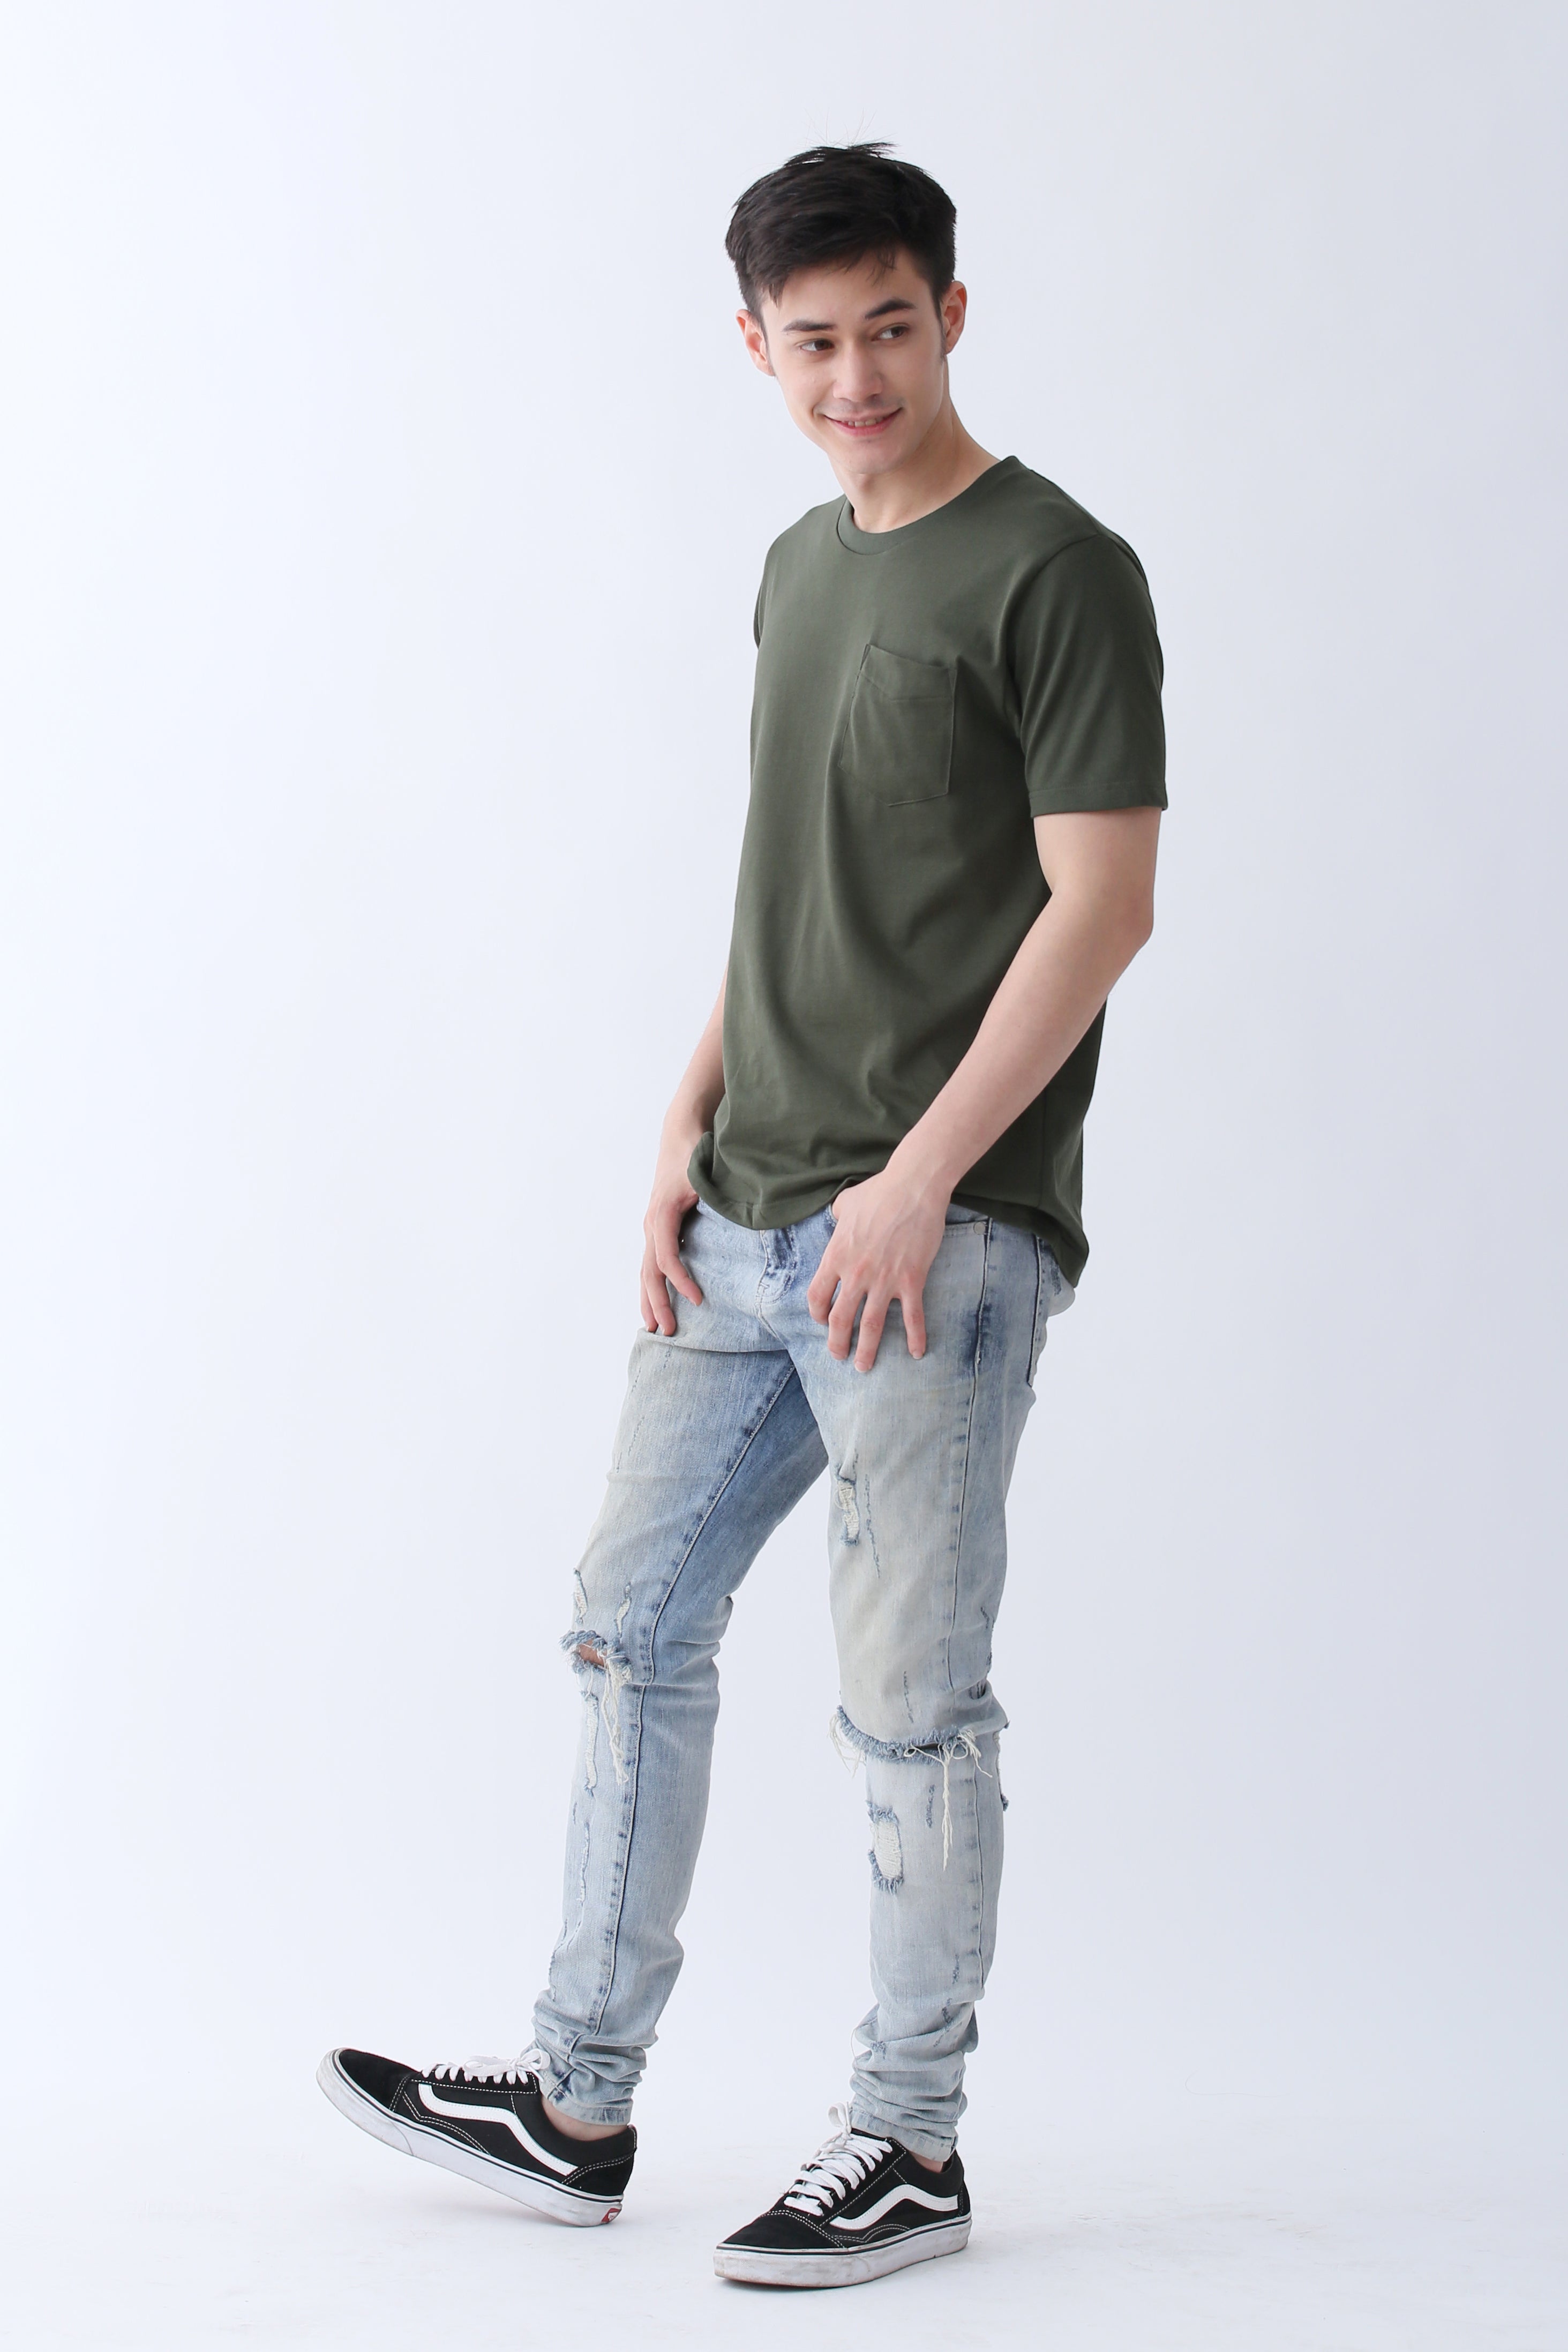 Army Green Shirt Mens Outfit Online ...